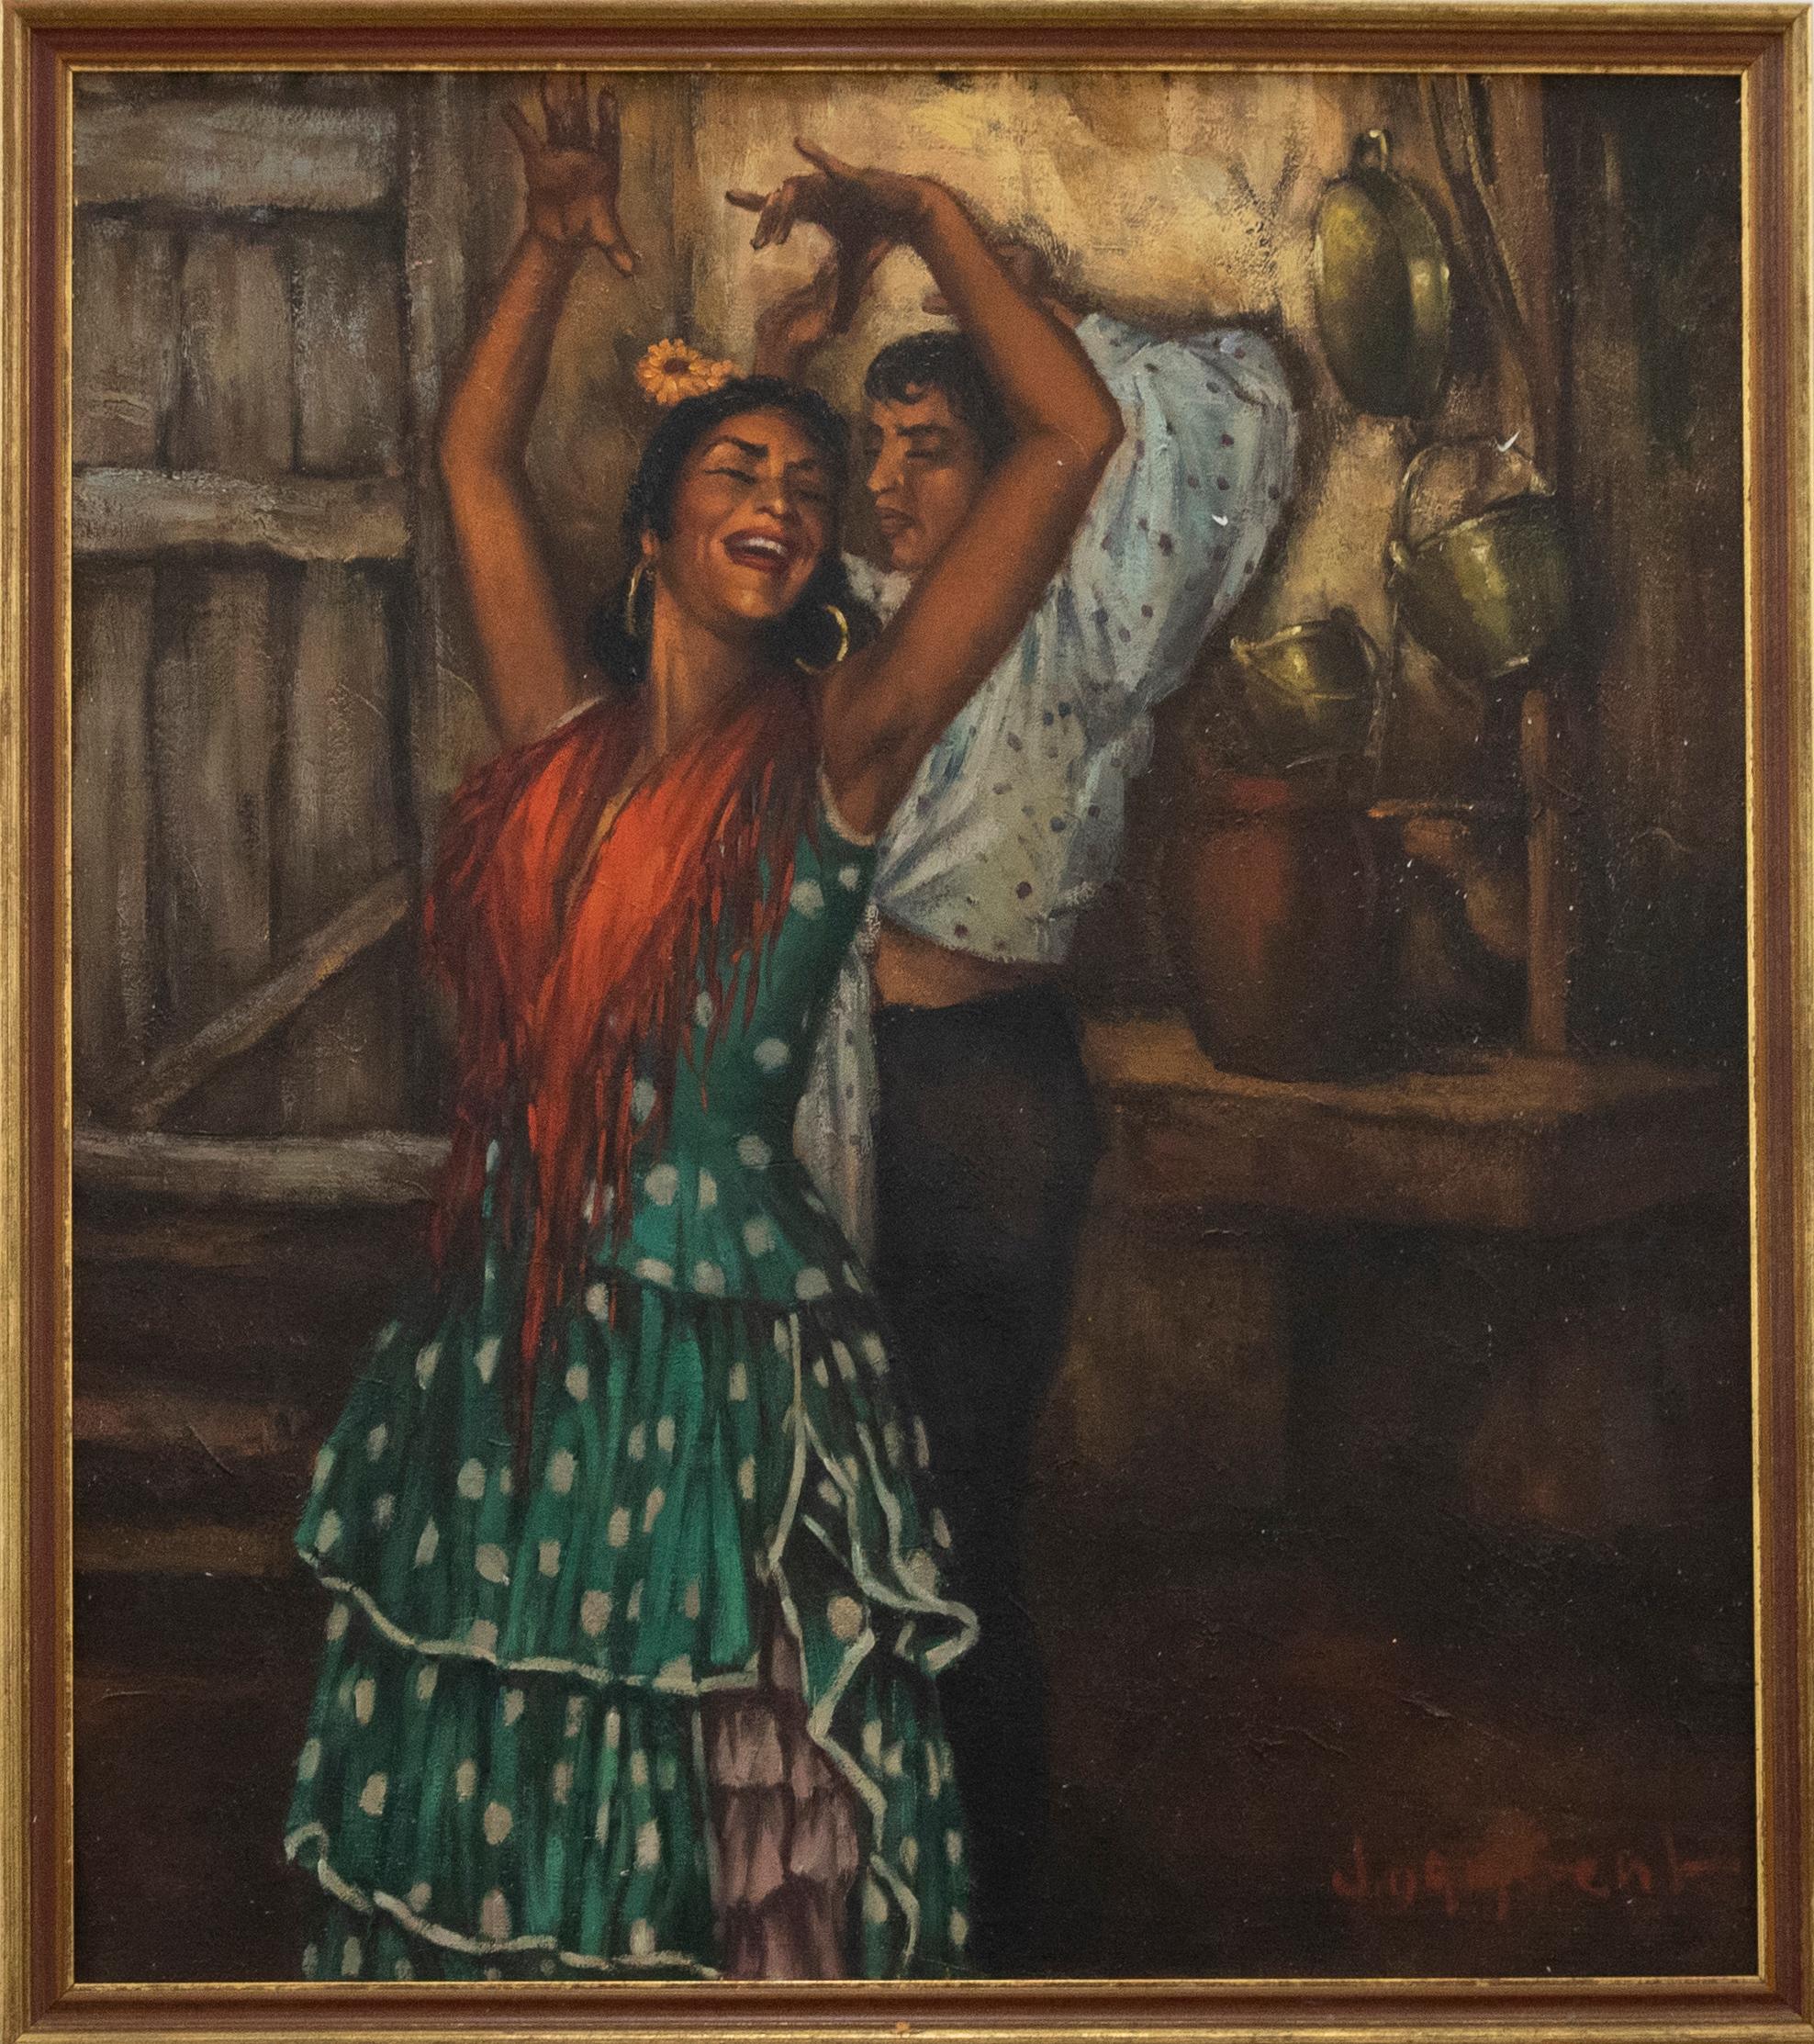 A striking scene depicting two Spanish dancers performing the flamenco. The pair wear joyous expressions as they dance, wearing colourful, traditional clothing. Signed to the lower right. Inscribed to the reverse: ''La Pepa' Cueva Gitano Granada'